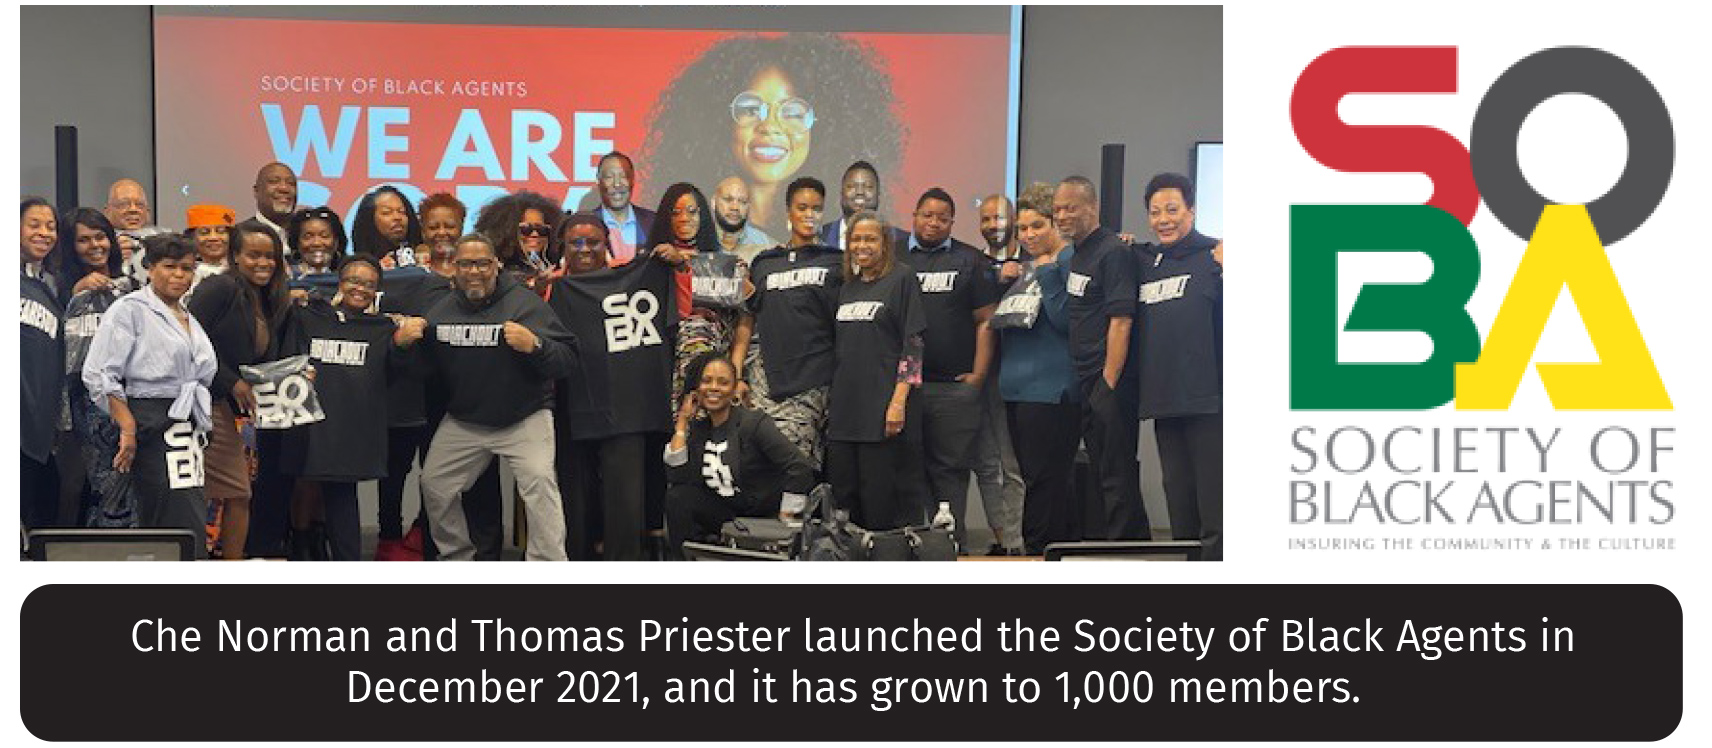 Che Norman and Thomas Priester launched the Society of Black Agents in December 2021, and it has grown to 1,000 members.